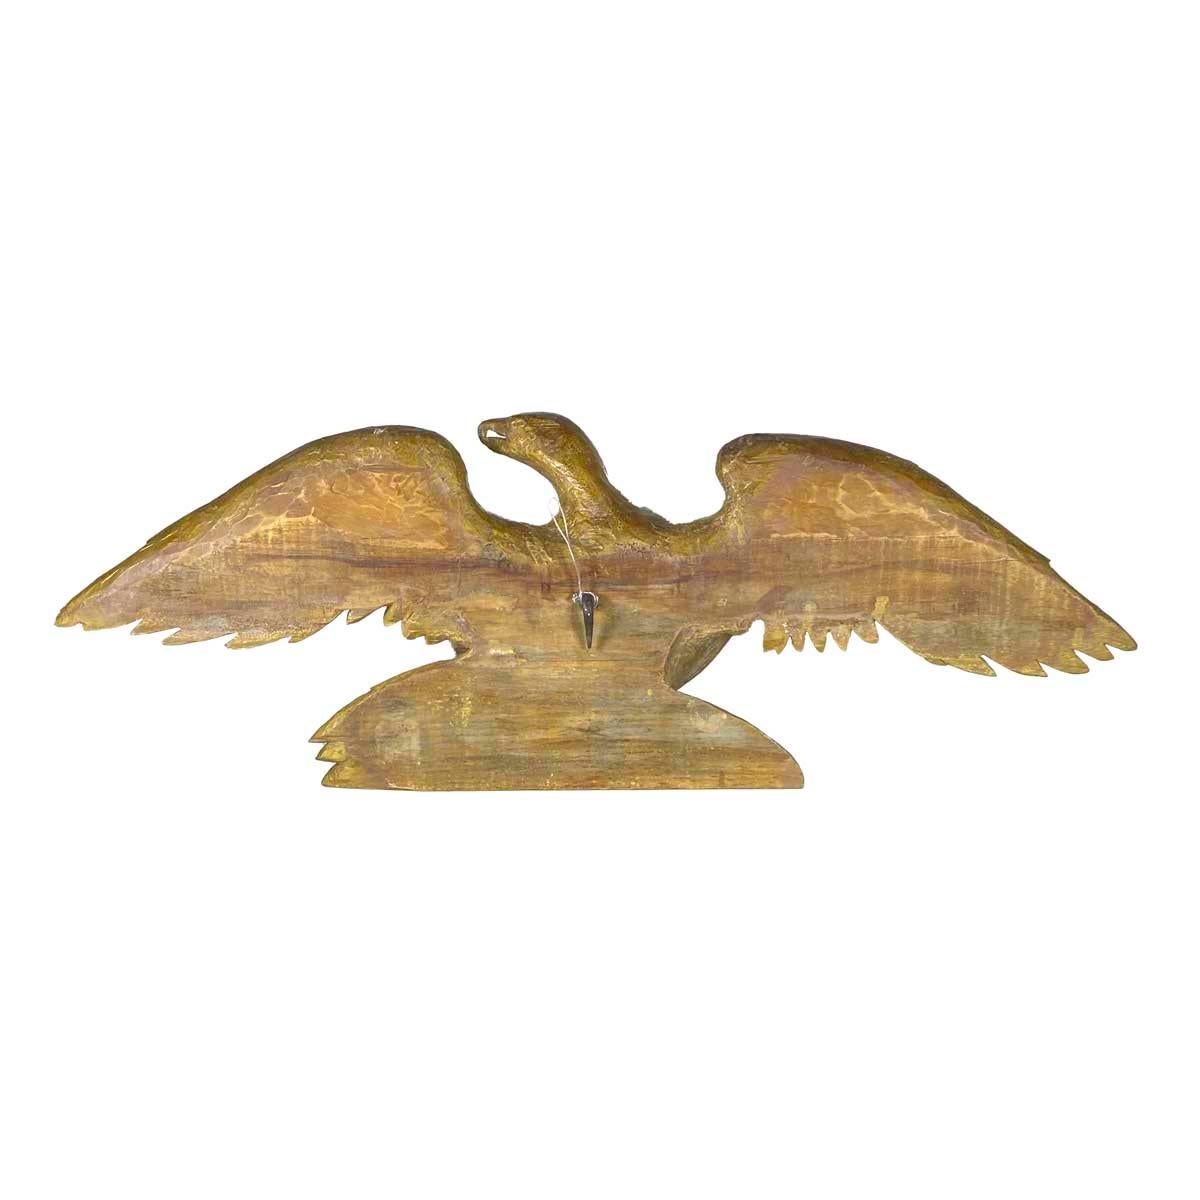 19th Century Folk Art Carved and Painted Figure of a Spread Winged Eagle with Shield